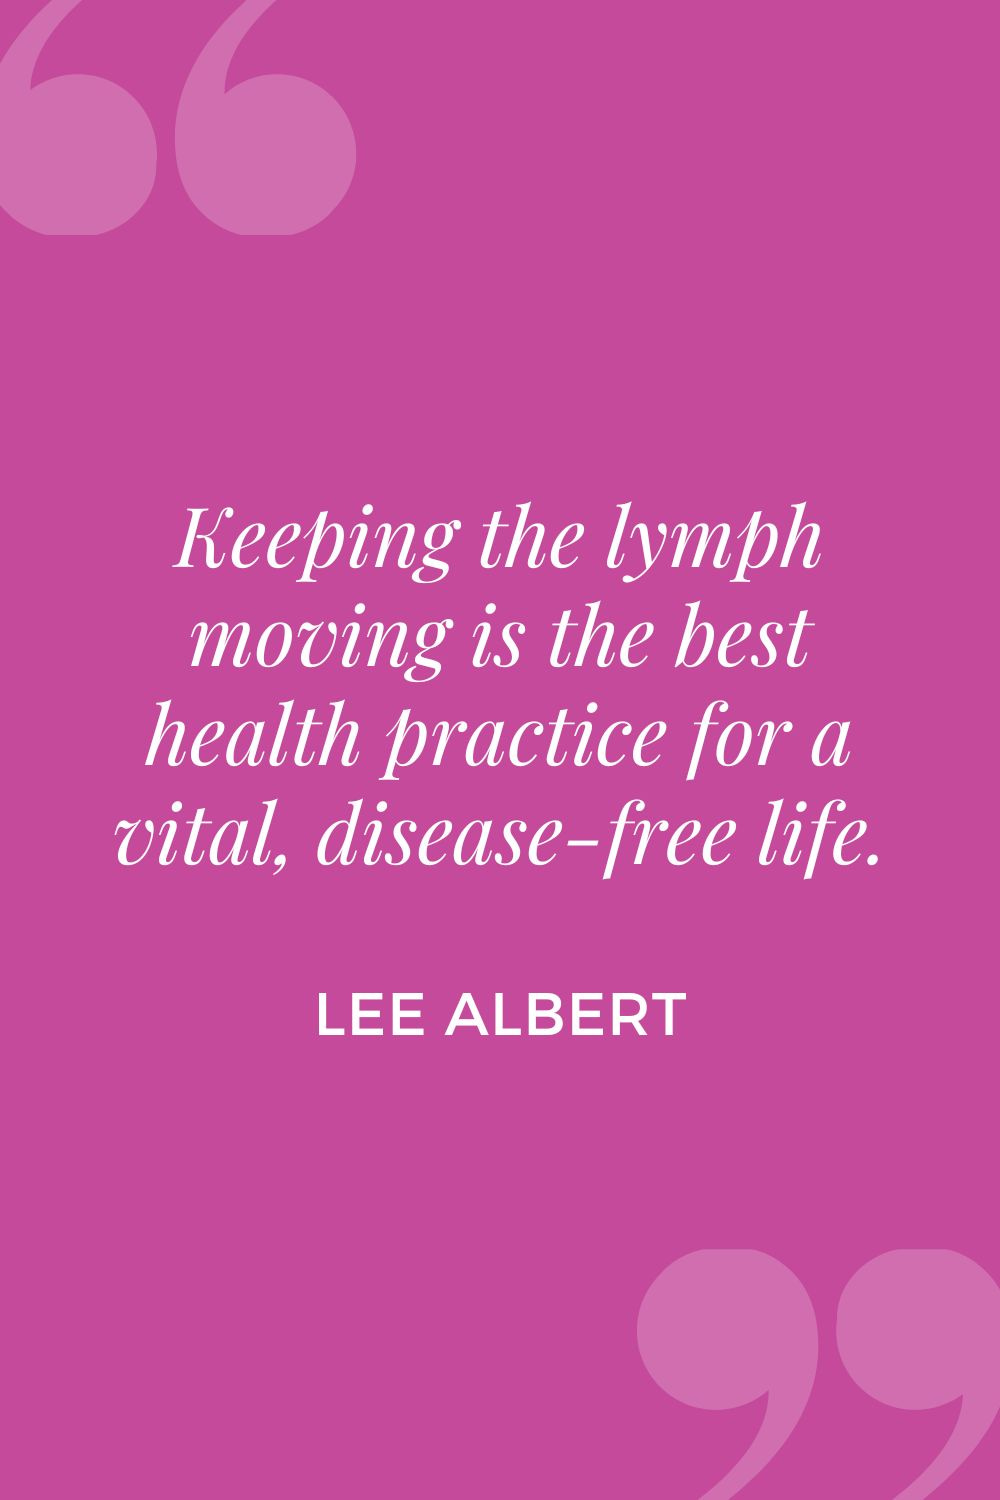 Keeping the lymph moving is the best health practice for a vital, disease-free life.